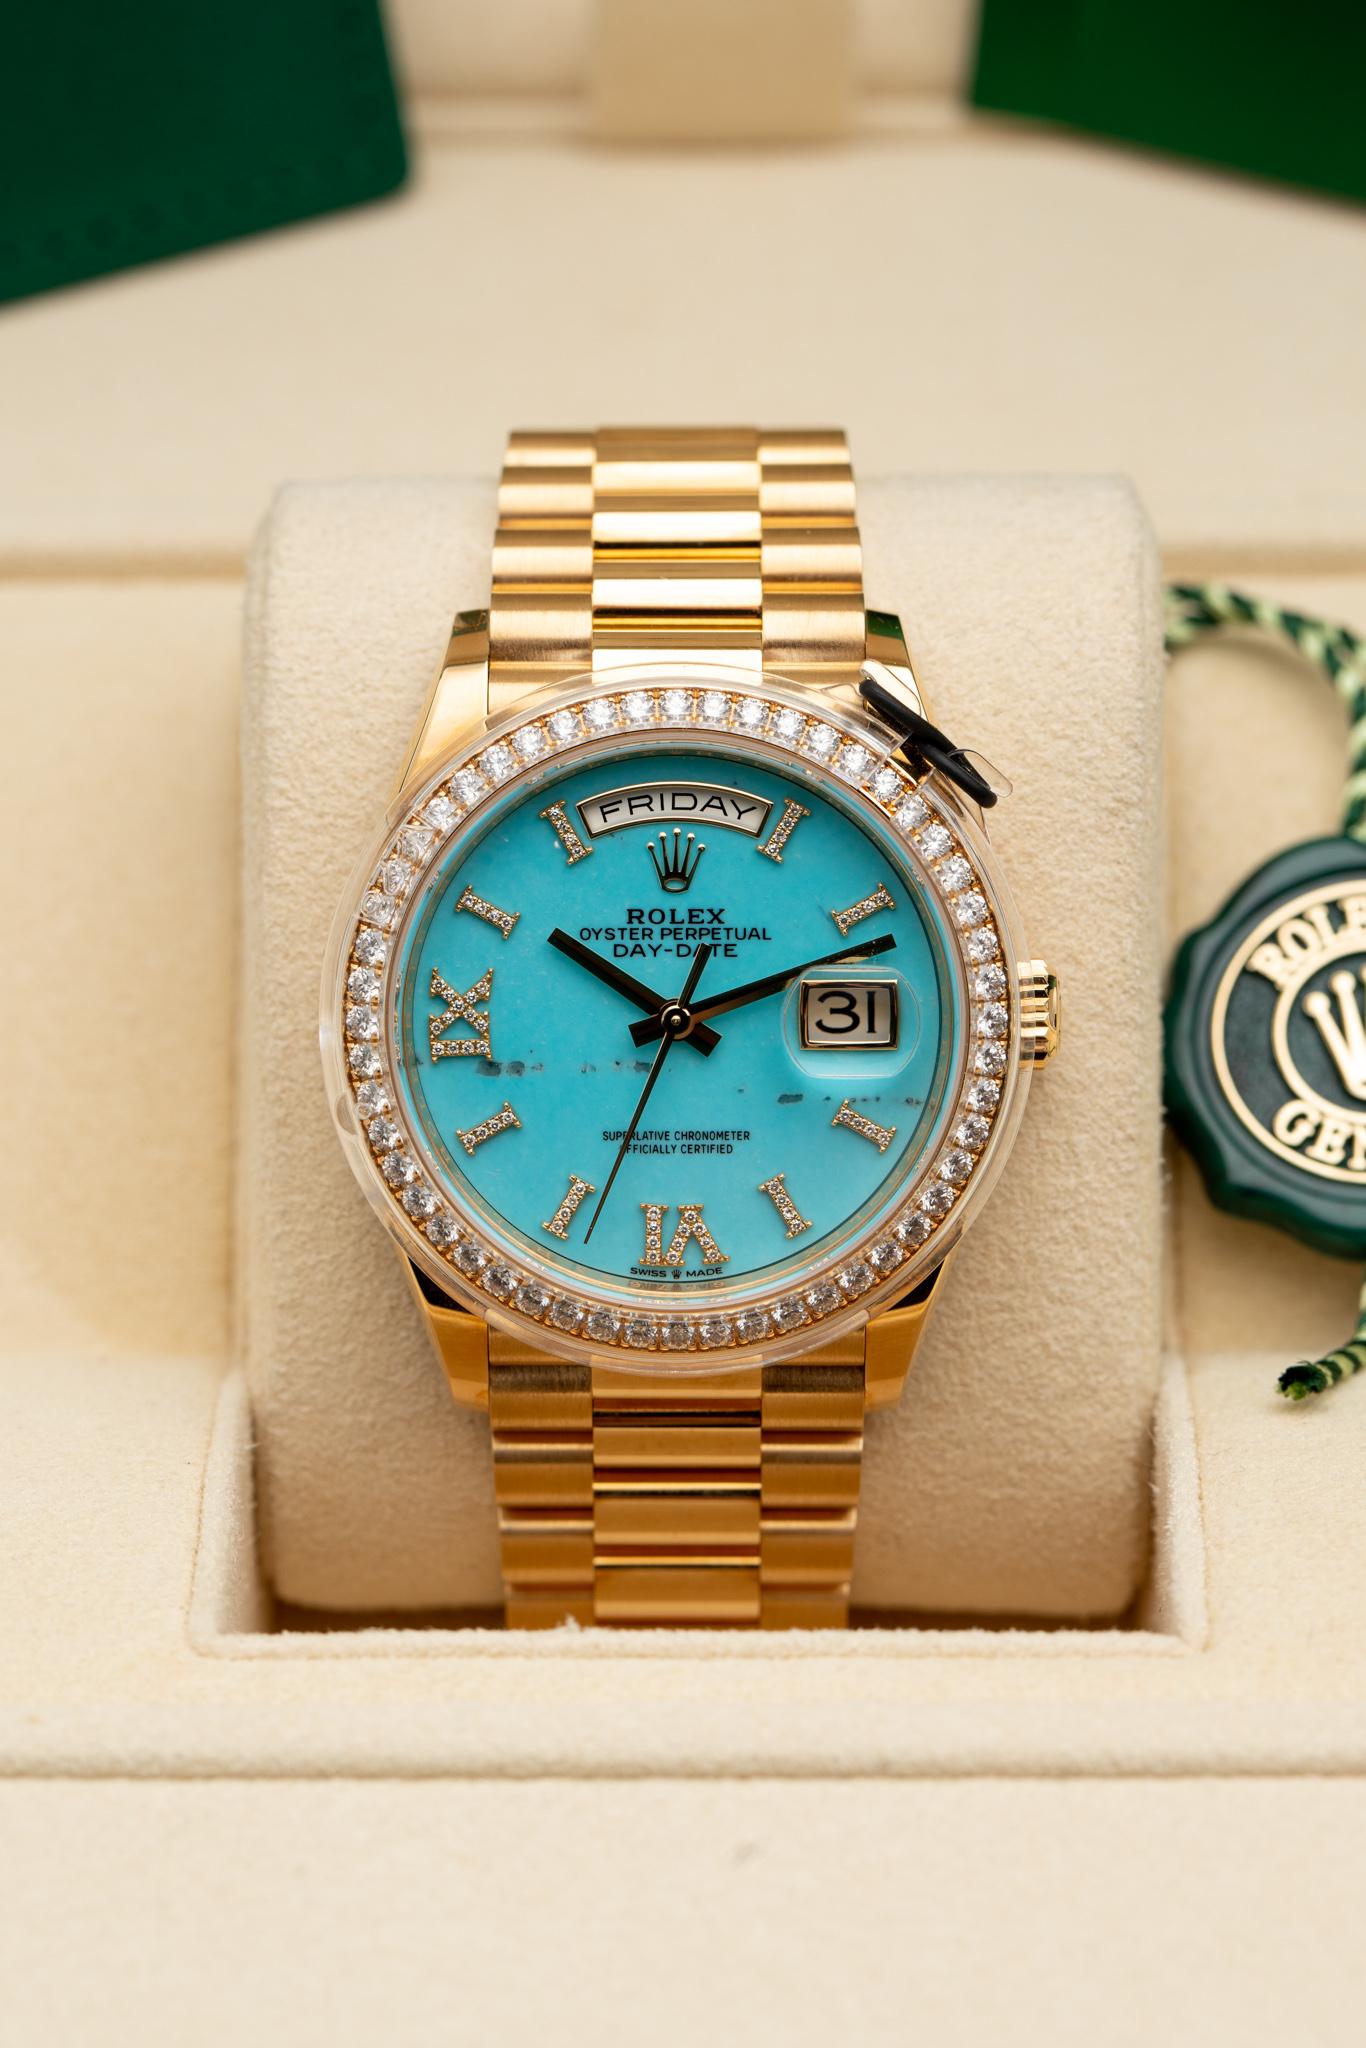 This dial features hour markers in 18 ct gold, set with 32 diamonds, and a Roman VI and IX in 18 ct gold, set with 24 diamonds. Only found in a few places on Earth, turquoise has been prized for thousands of years for its special hue. Rolex selects